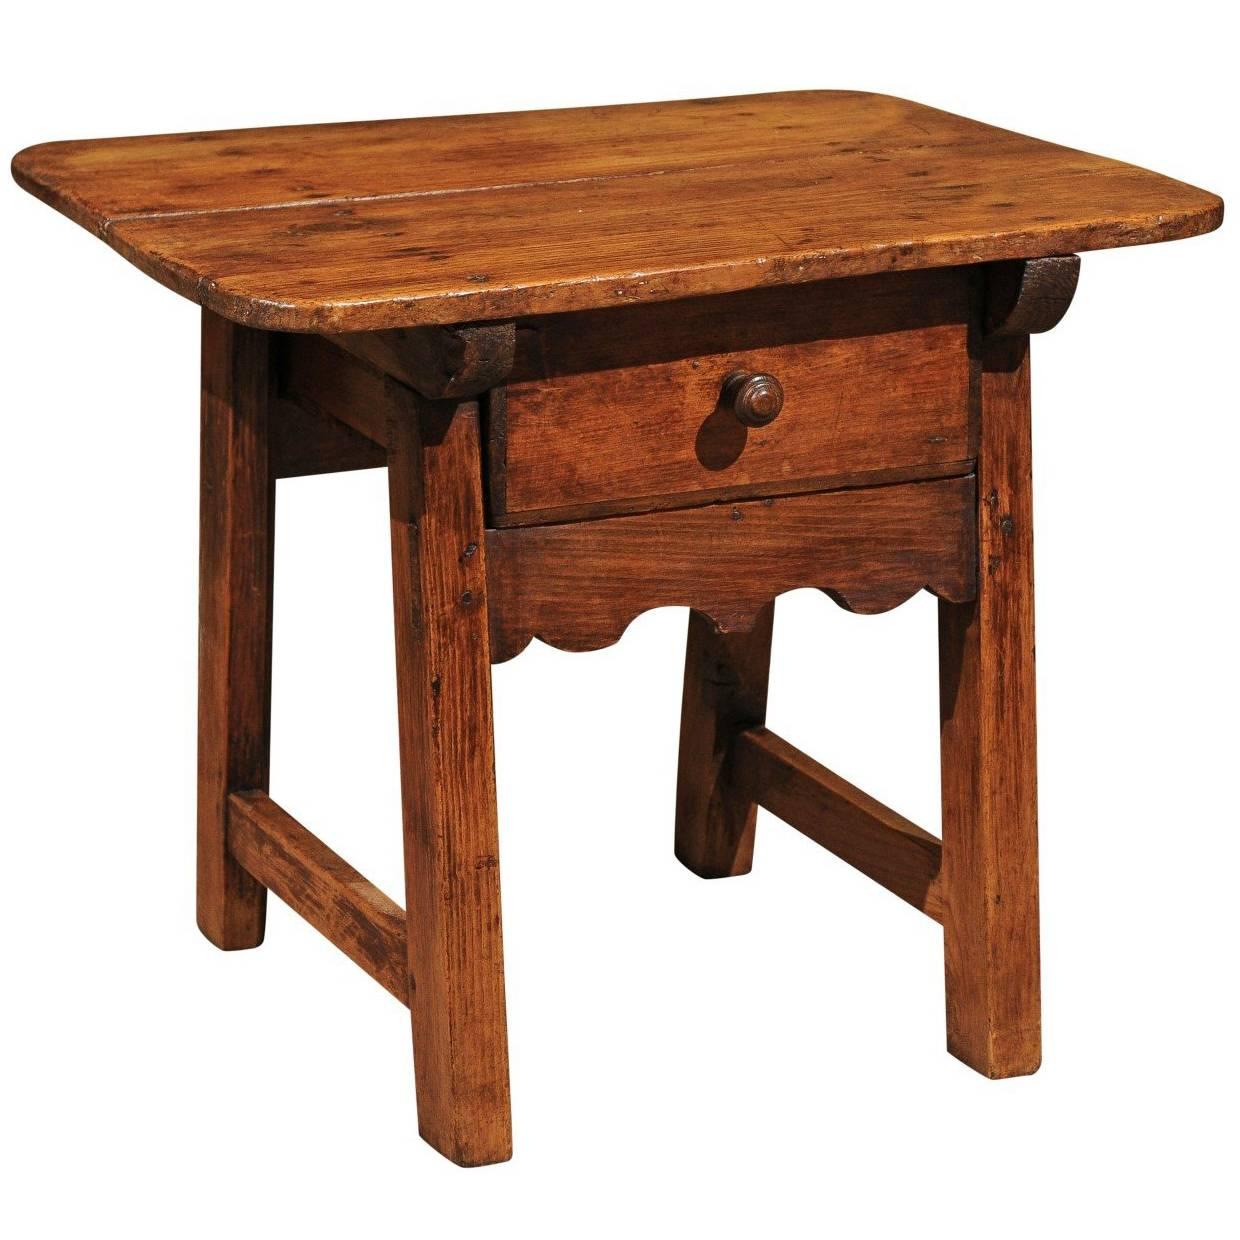 19th Century Pine Shepherds Table from Spain